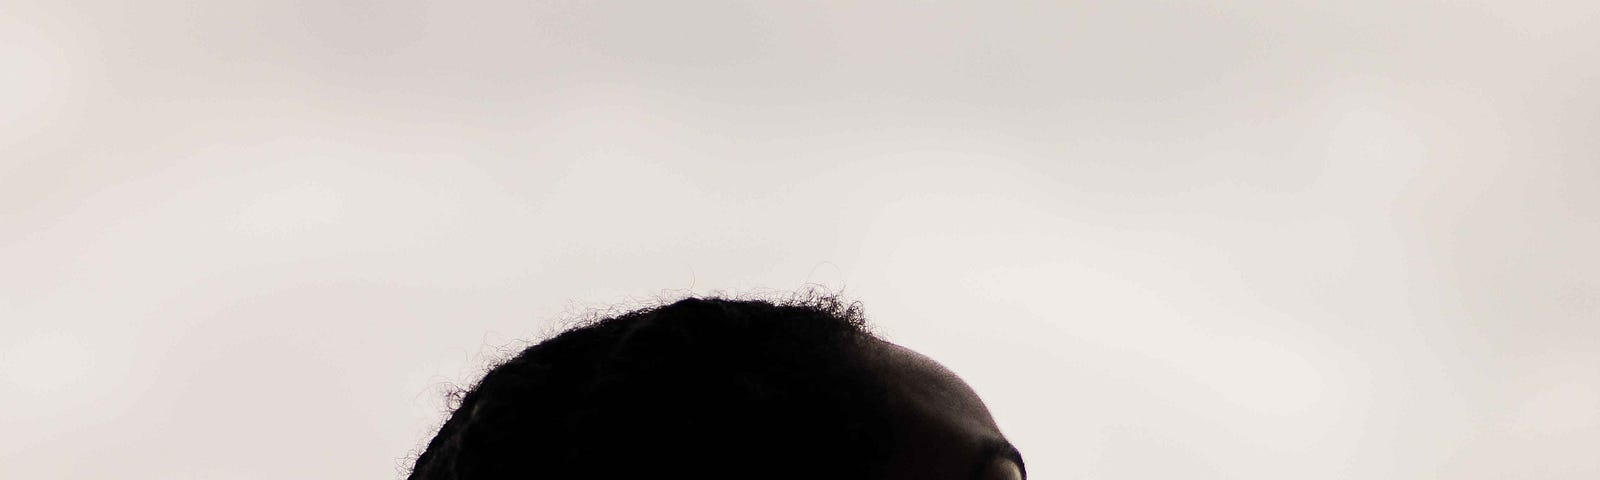 Black woman with long plaits looks up at a grey sky. Her face is in shadow